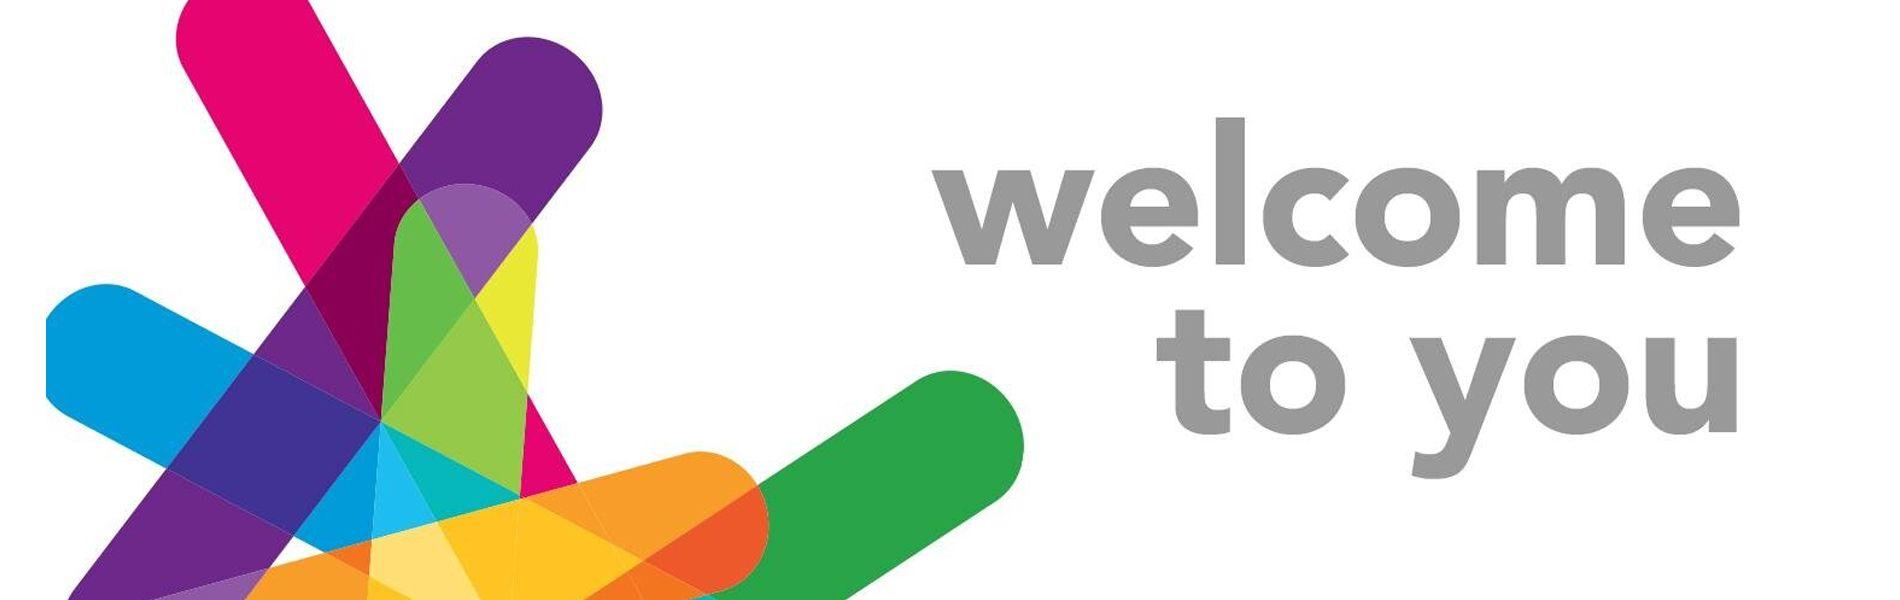 23 and Me Logo - 23andMe Launches New Customer Experience Include Carrier